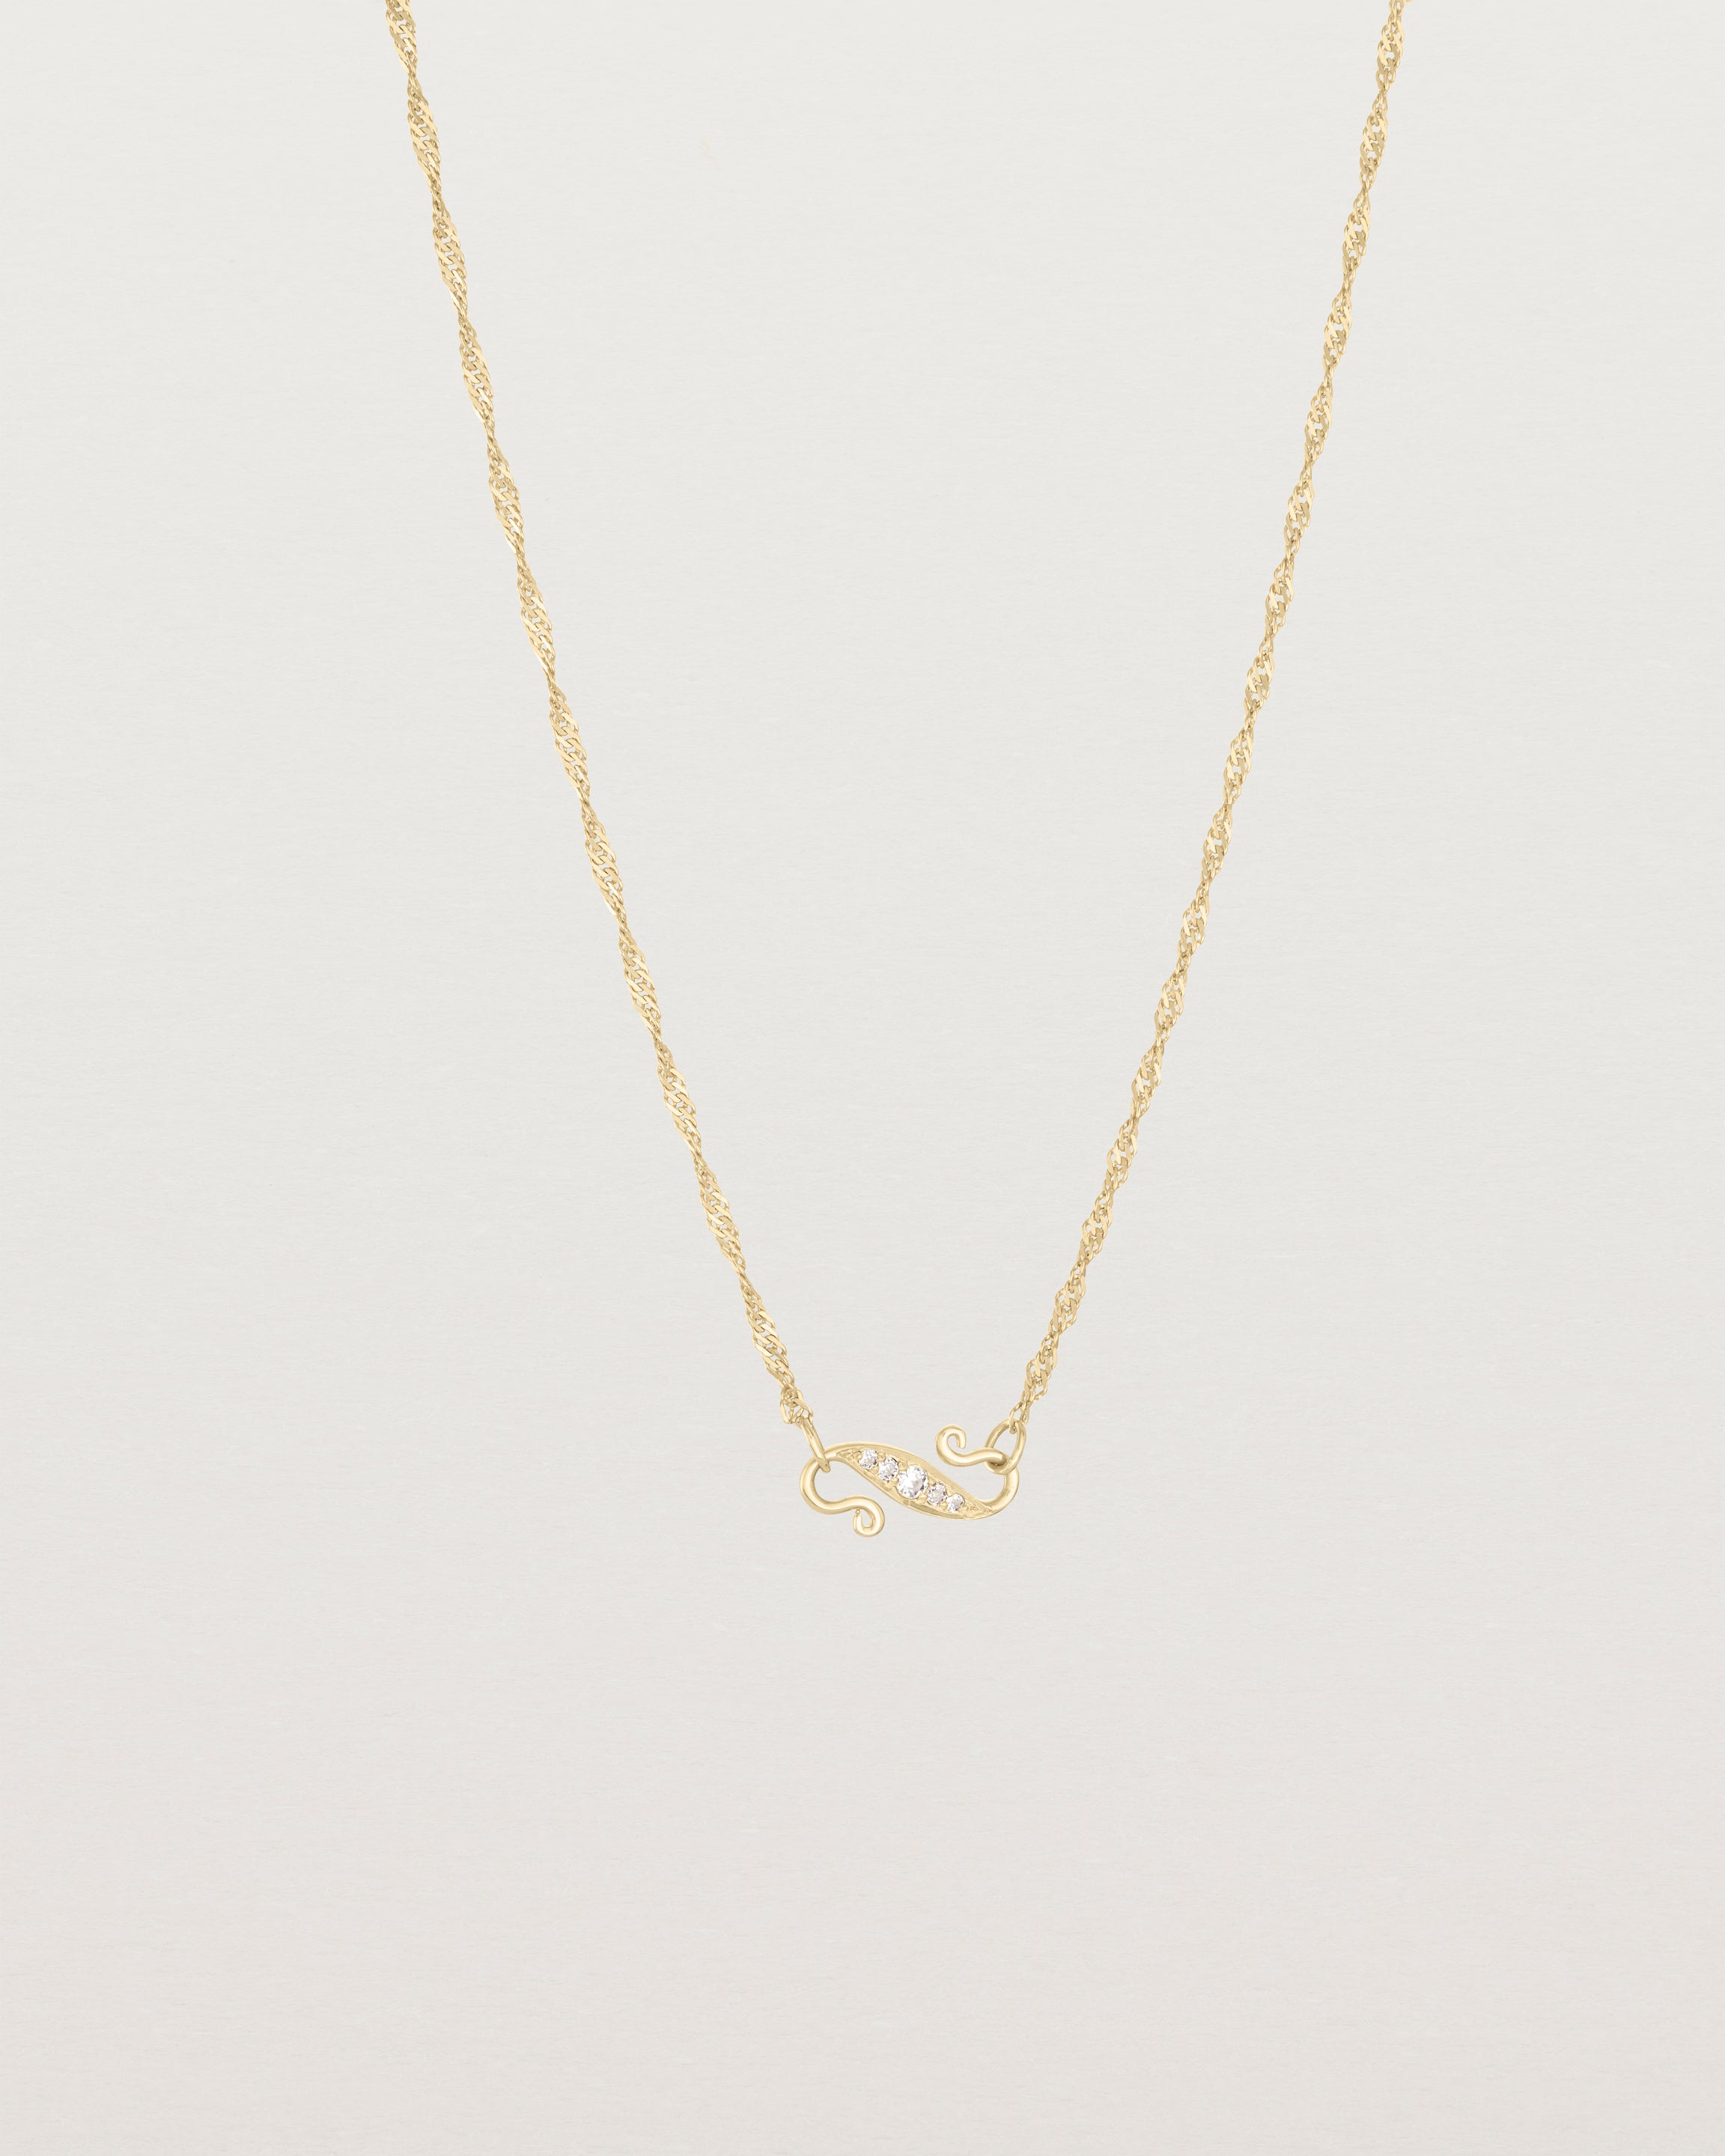 Lucille Chain Necklace | Vintage Inspired